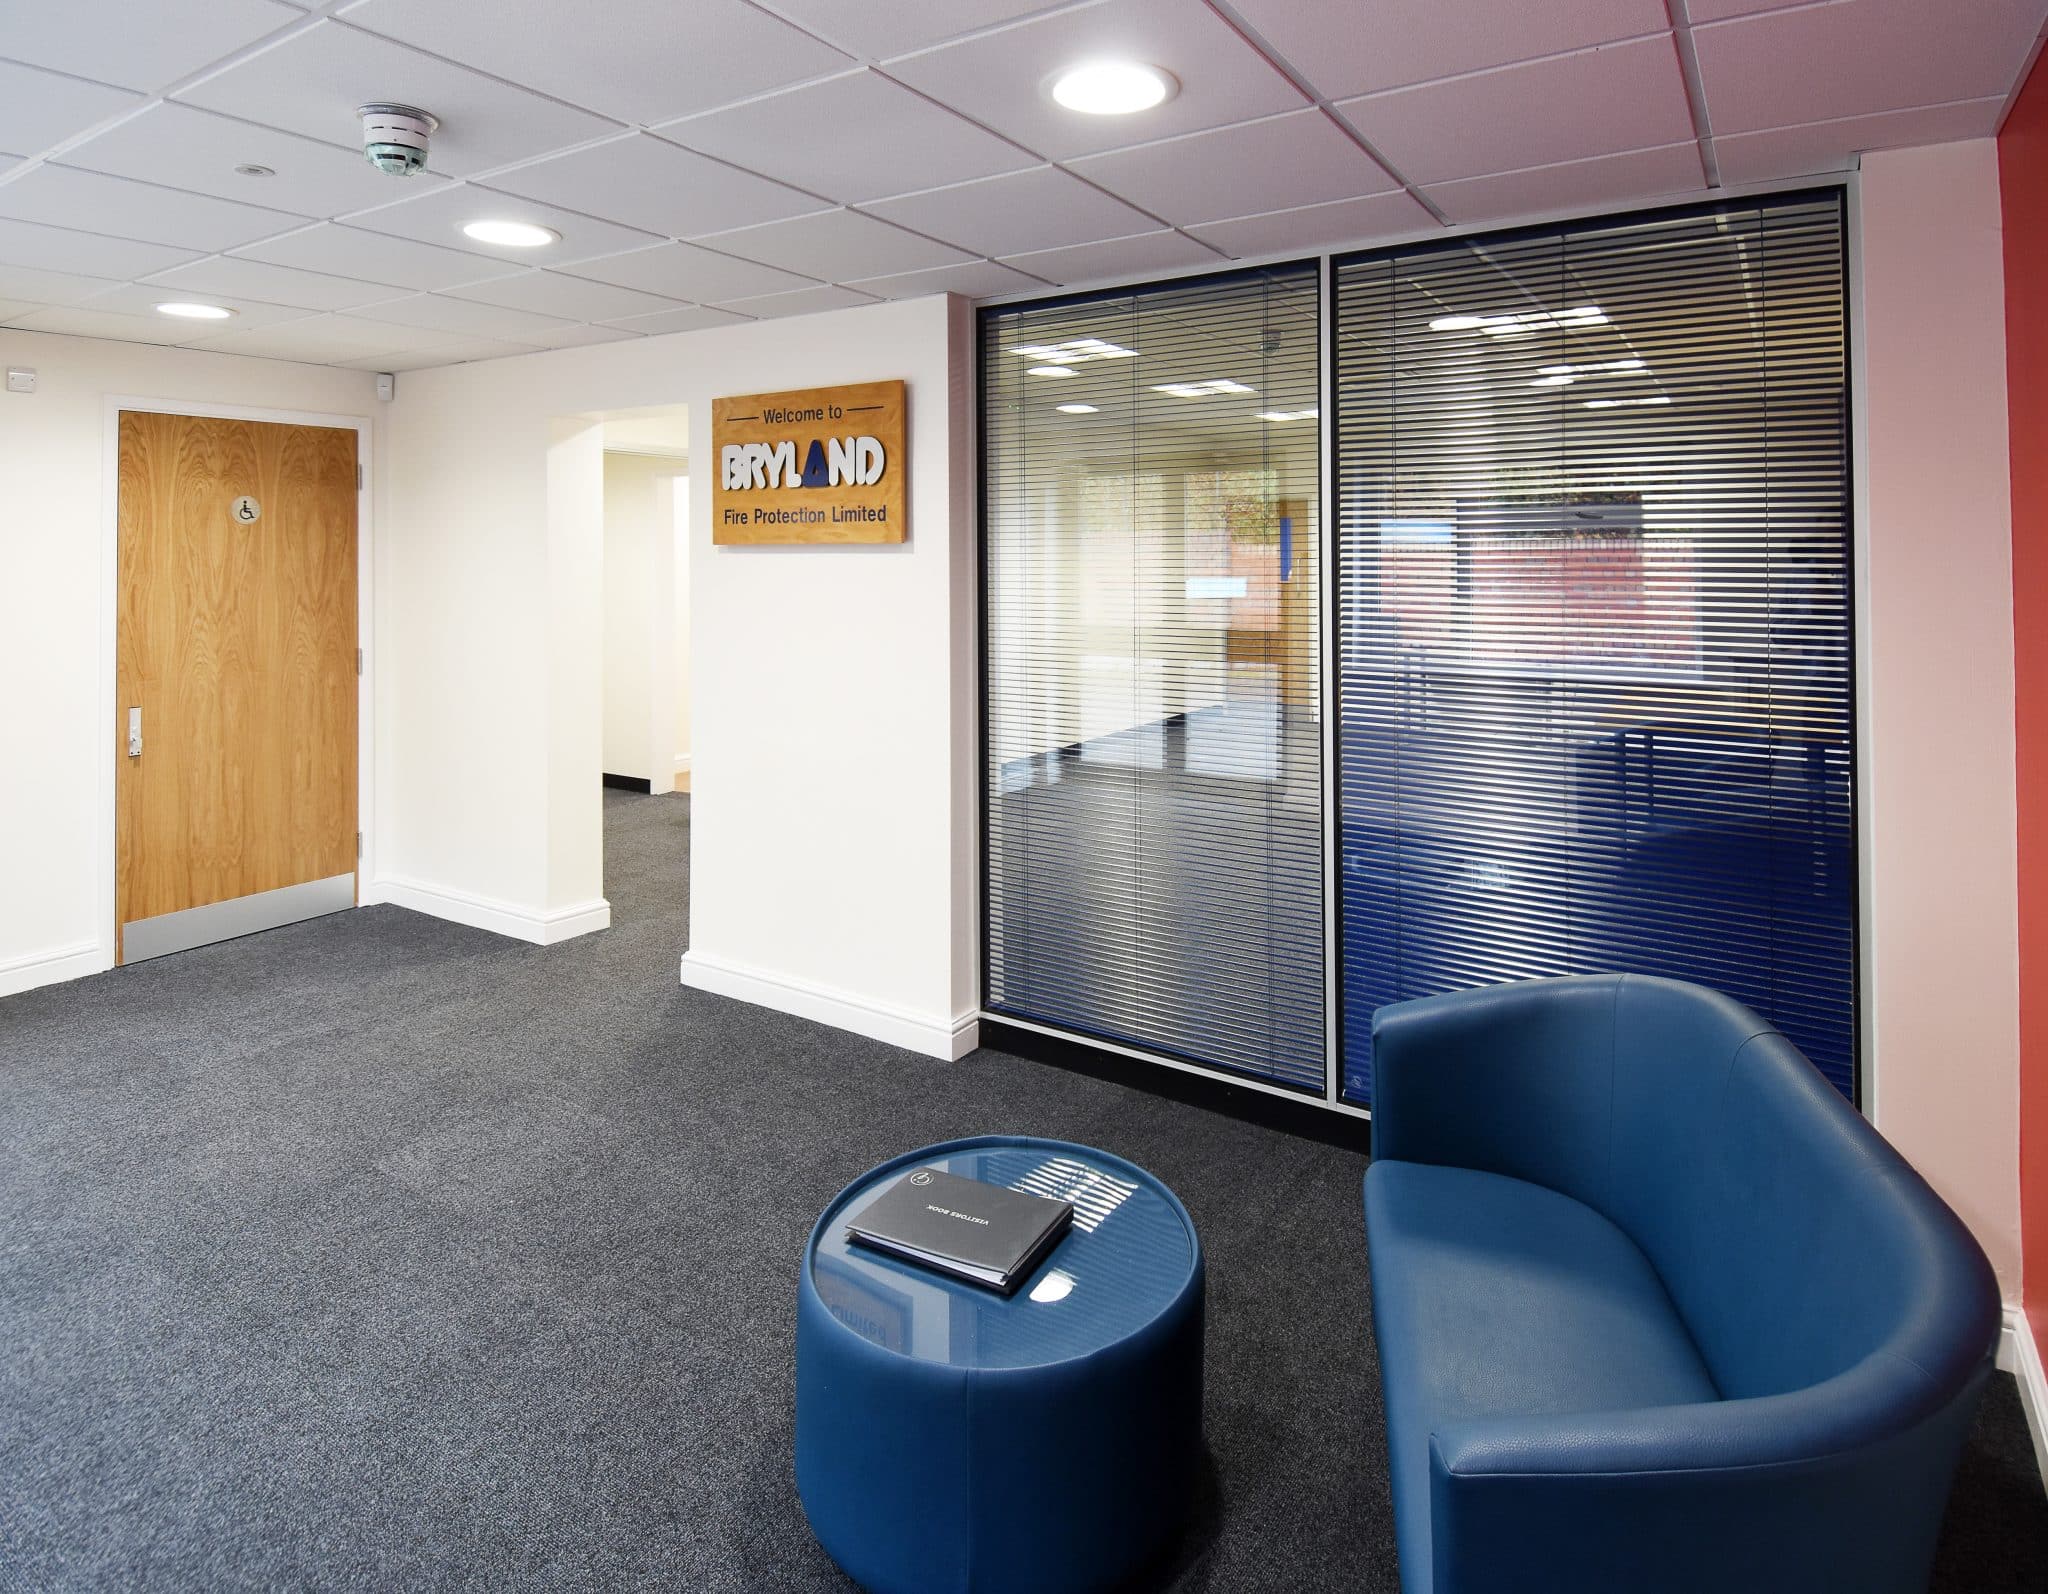 Office Partition Waiting Room at Bryland Fire Protection